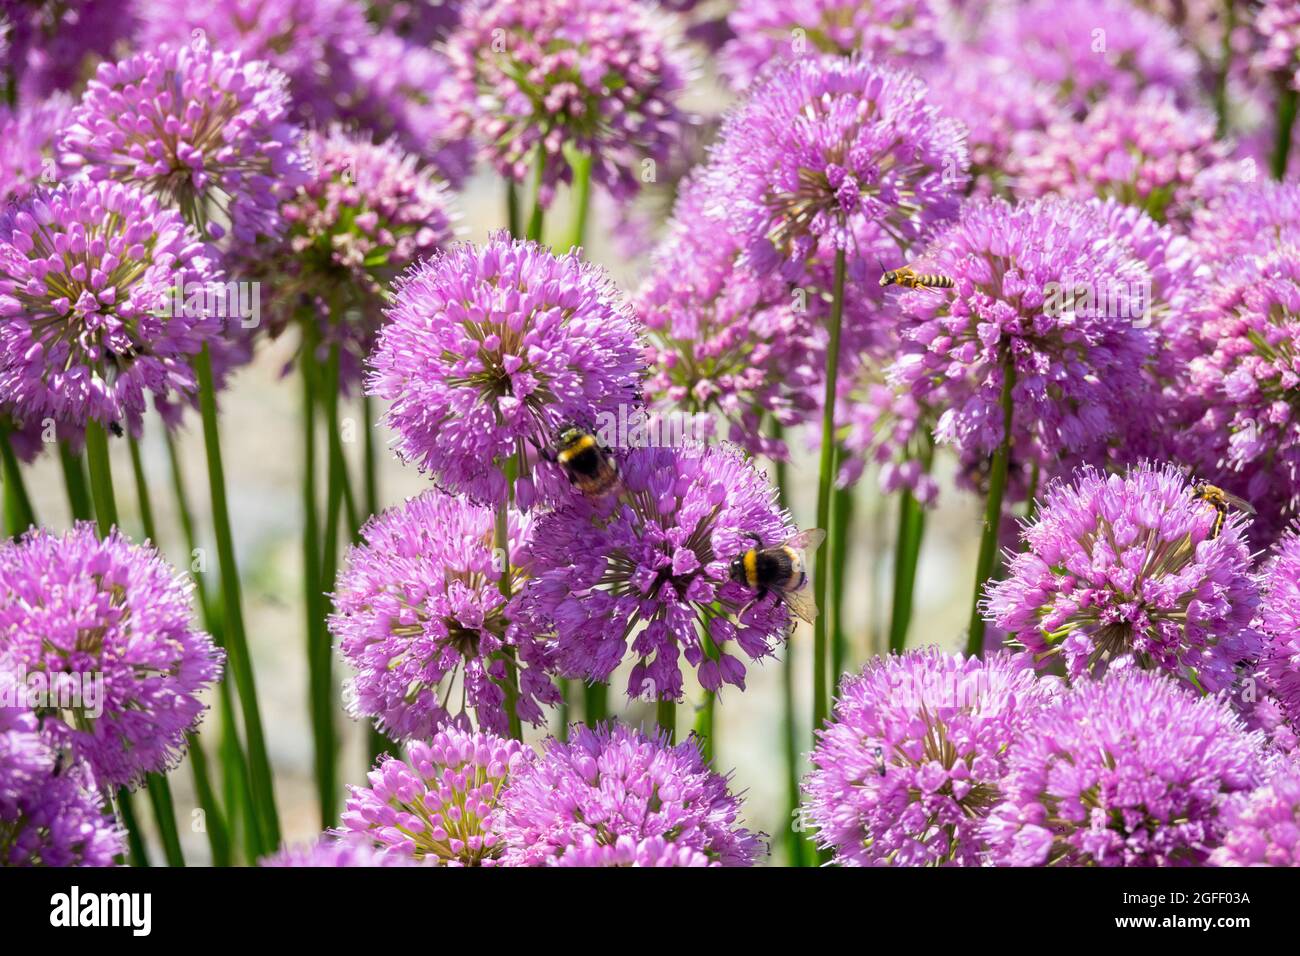 Ornamental Onion Bumblebees, insects on Allium Millenium Stock Photo